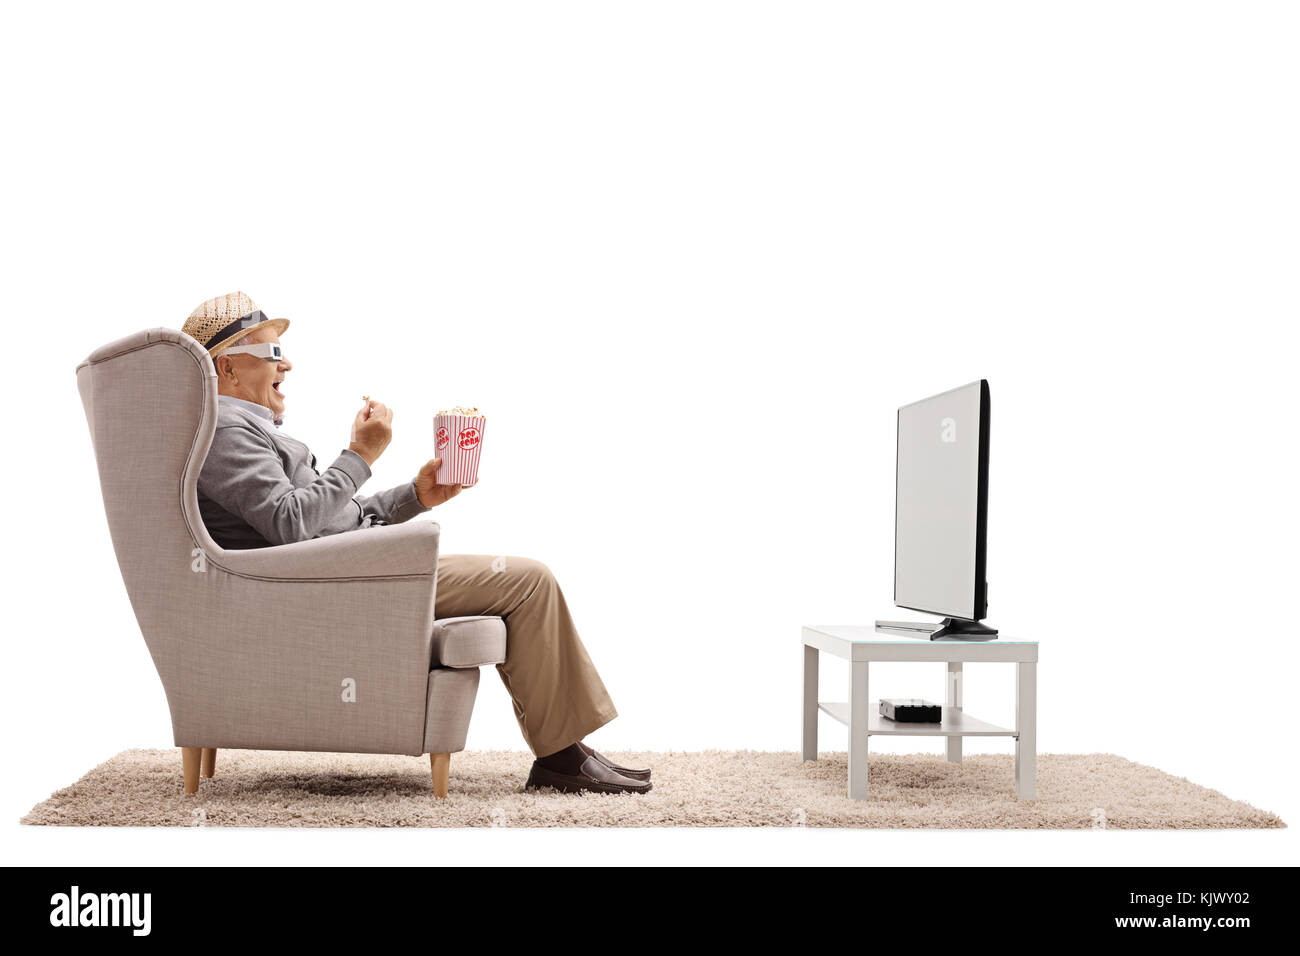 Mature man with 3-D glasses seated in an armchair eating popcorn and watching television isolated on white background Stock Photo